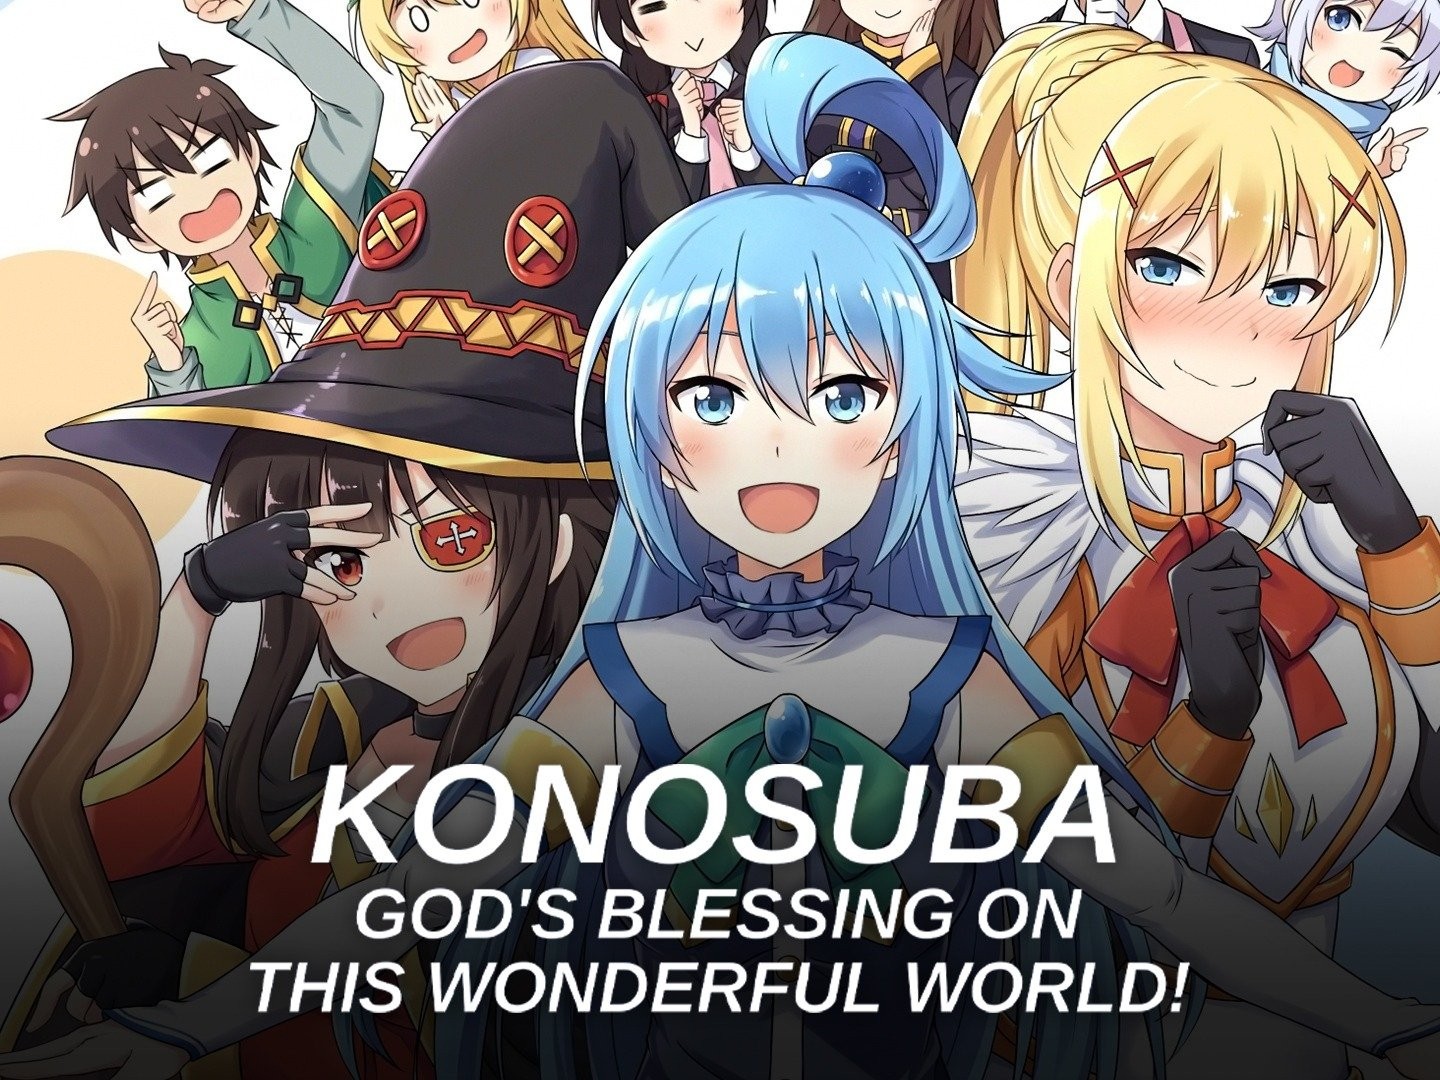 KonoSuba: An Explosion on This Wonderful World! episode 1: Megumin's quest  to master explosion magic begins